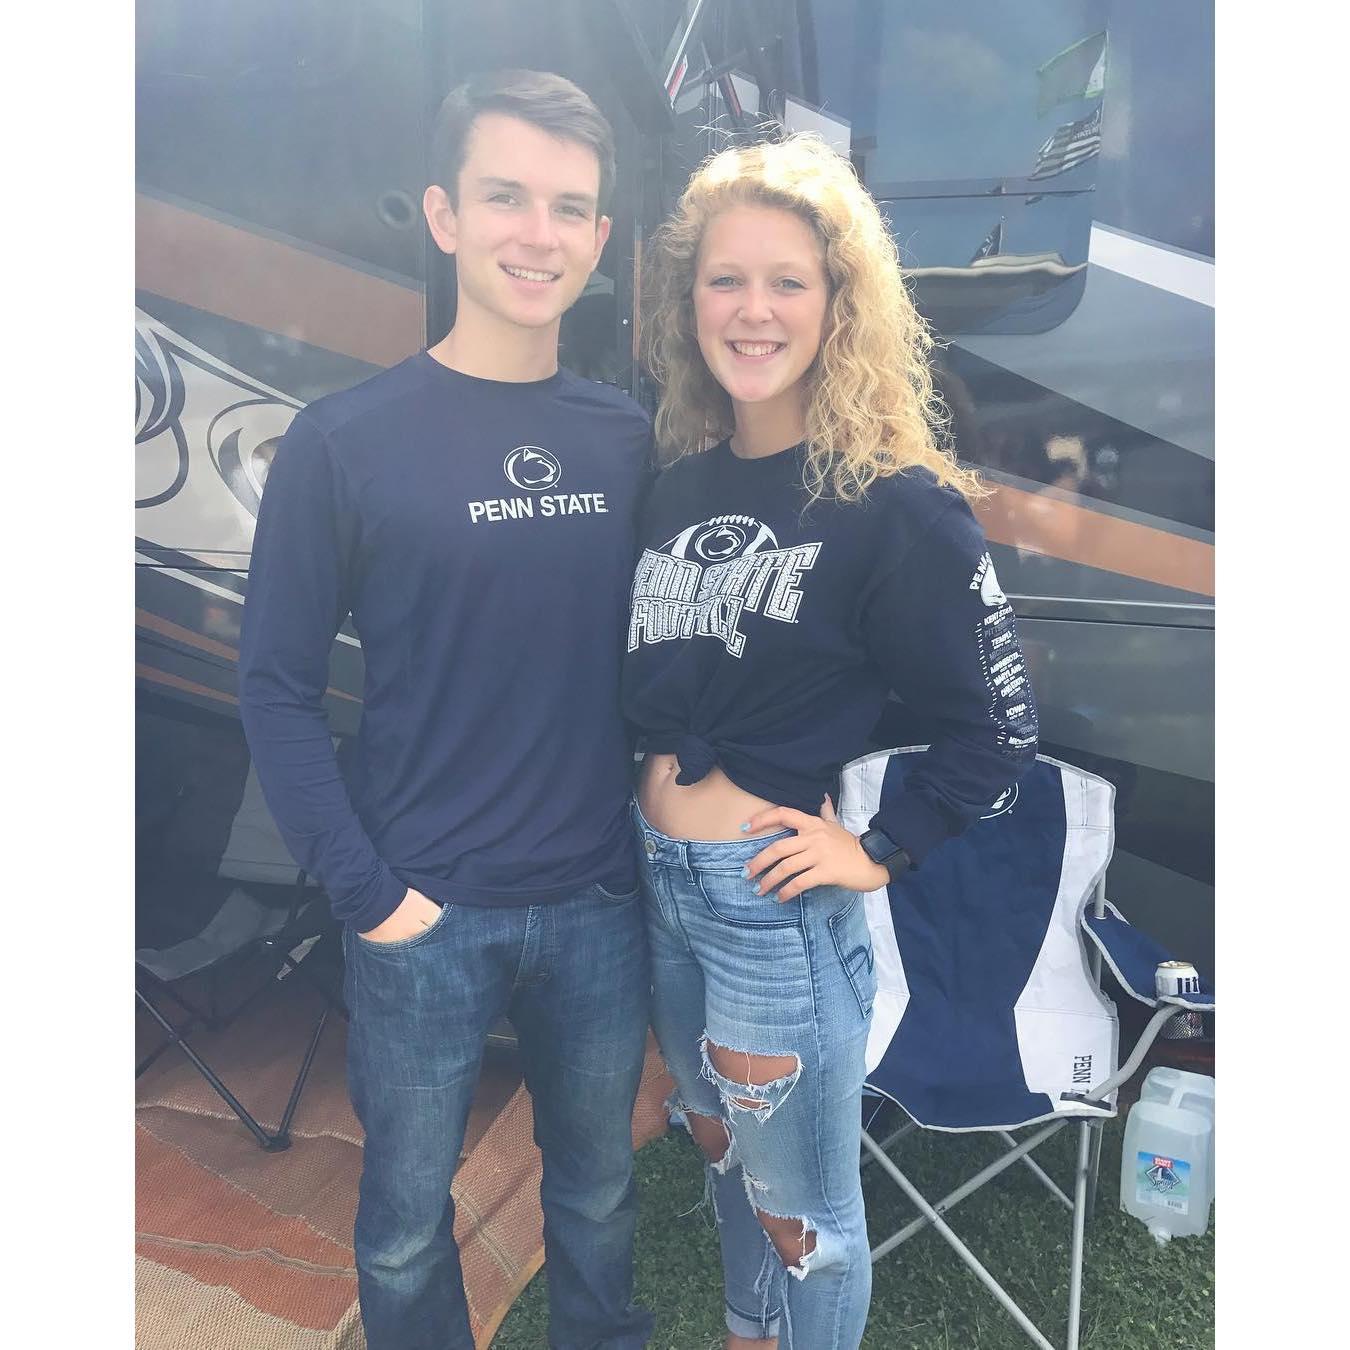 Another Penn State tailgate.